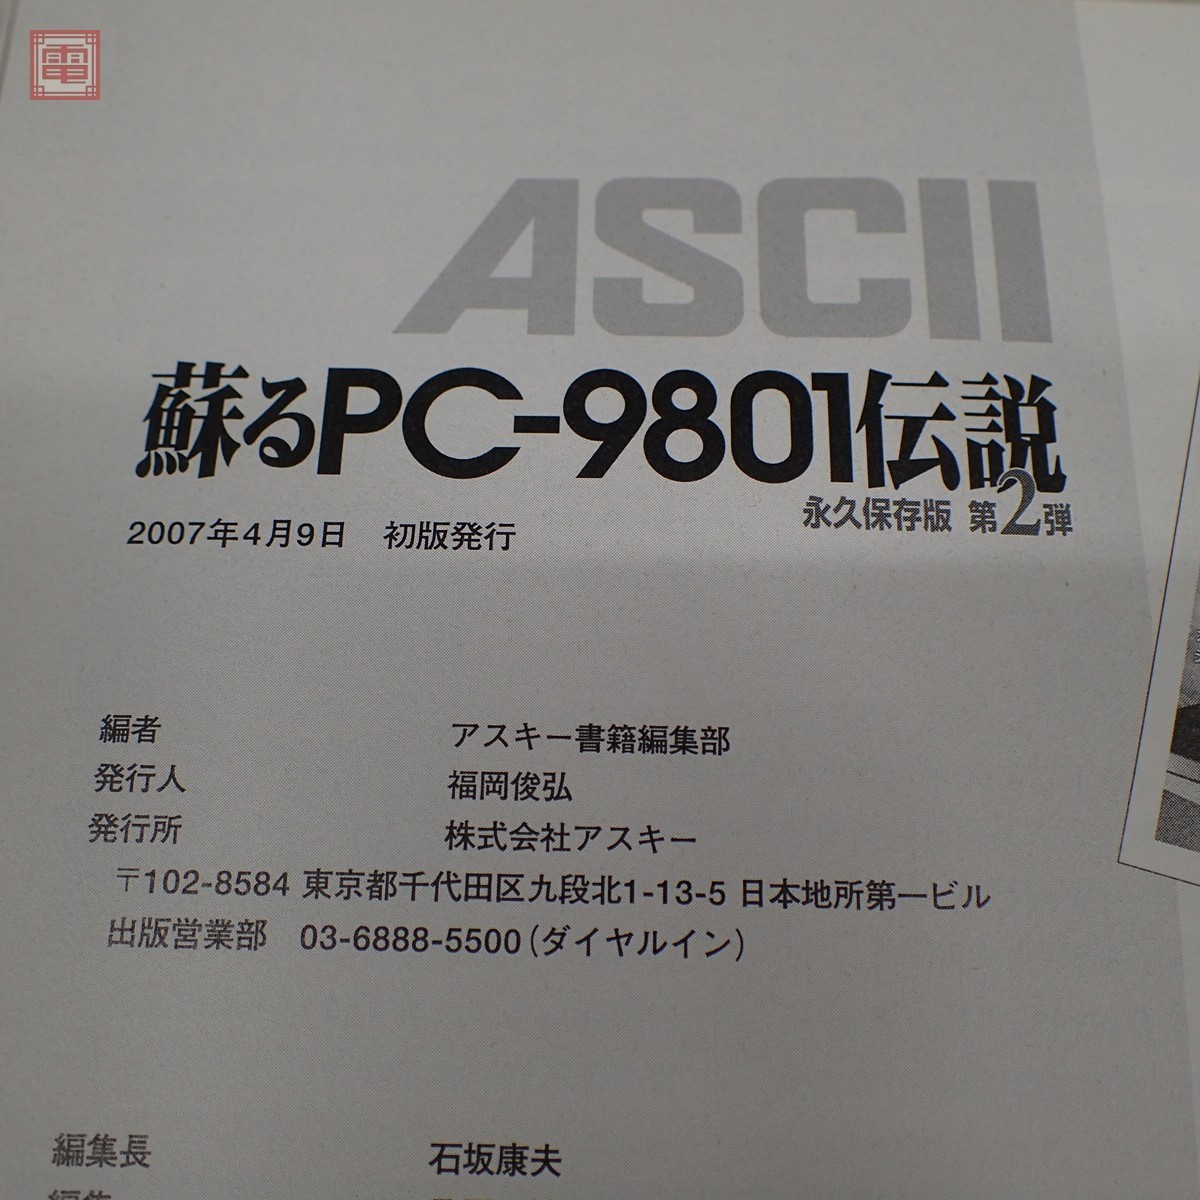  publication monthly ASCII separate volume ..PC-9801 legend permanent preservation version 2 ASCII 2007 year issue the first version binding *CD-ROM unopened [PP